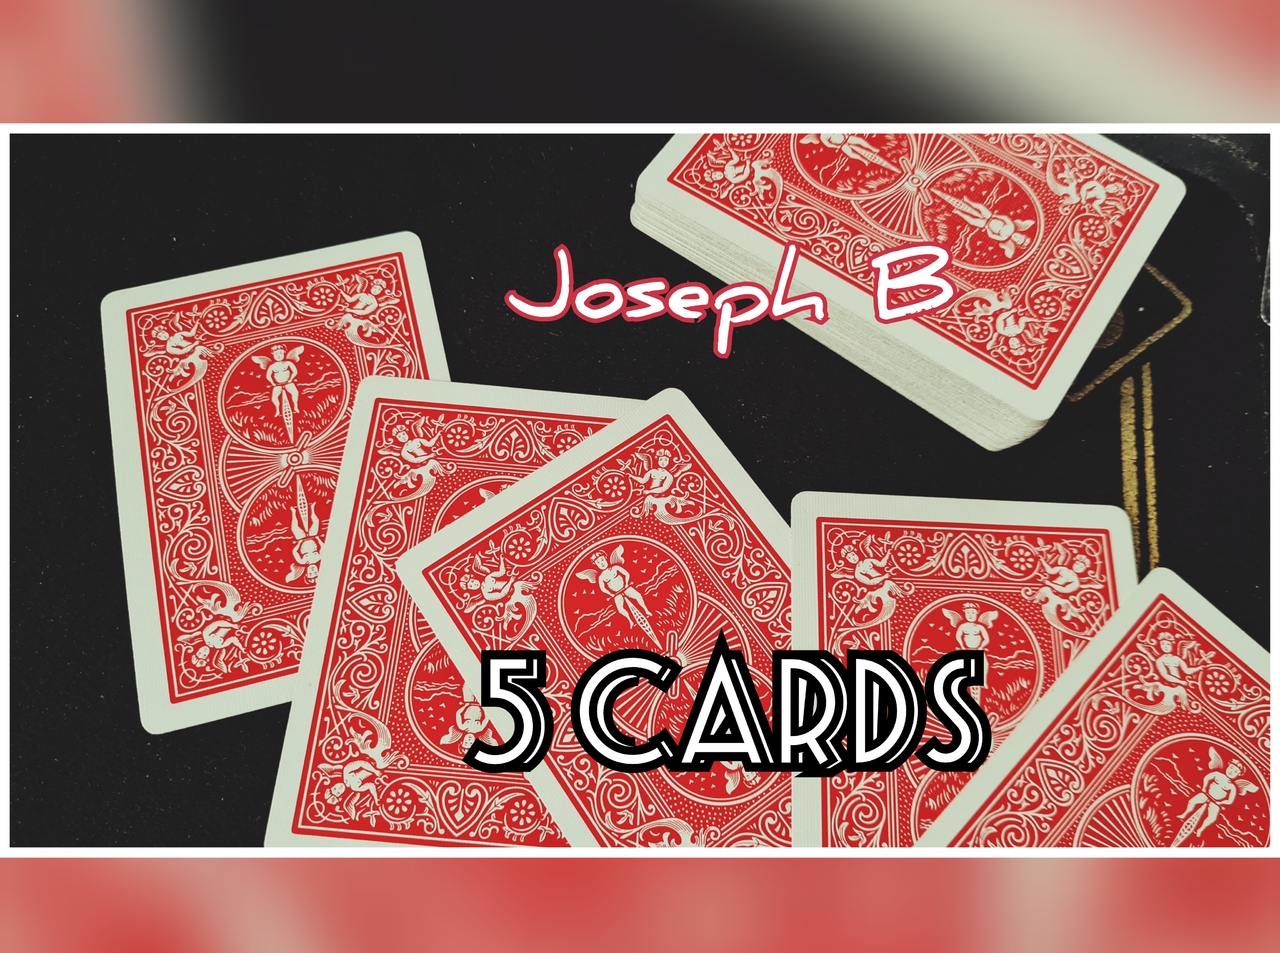 5 Cards by Joseph B (Mp4 Video Magic Download)